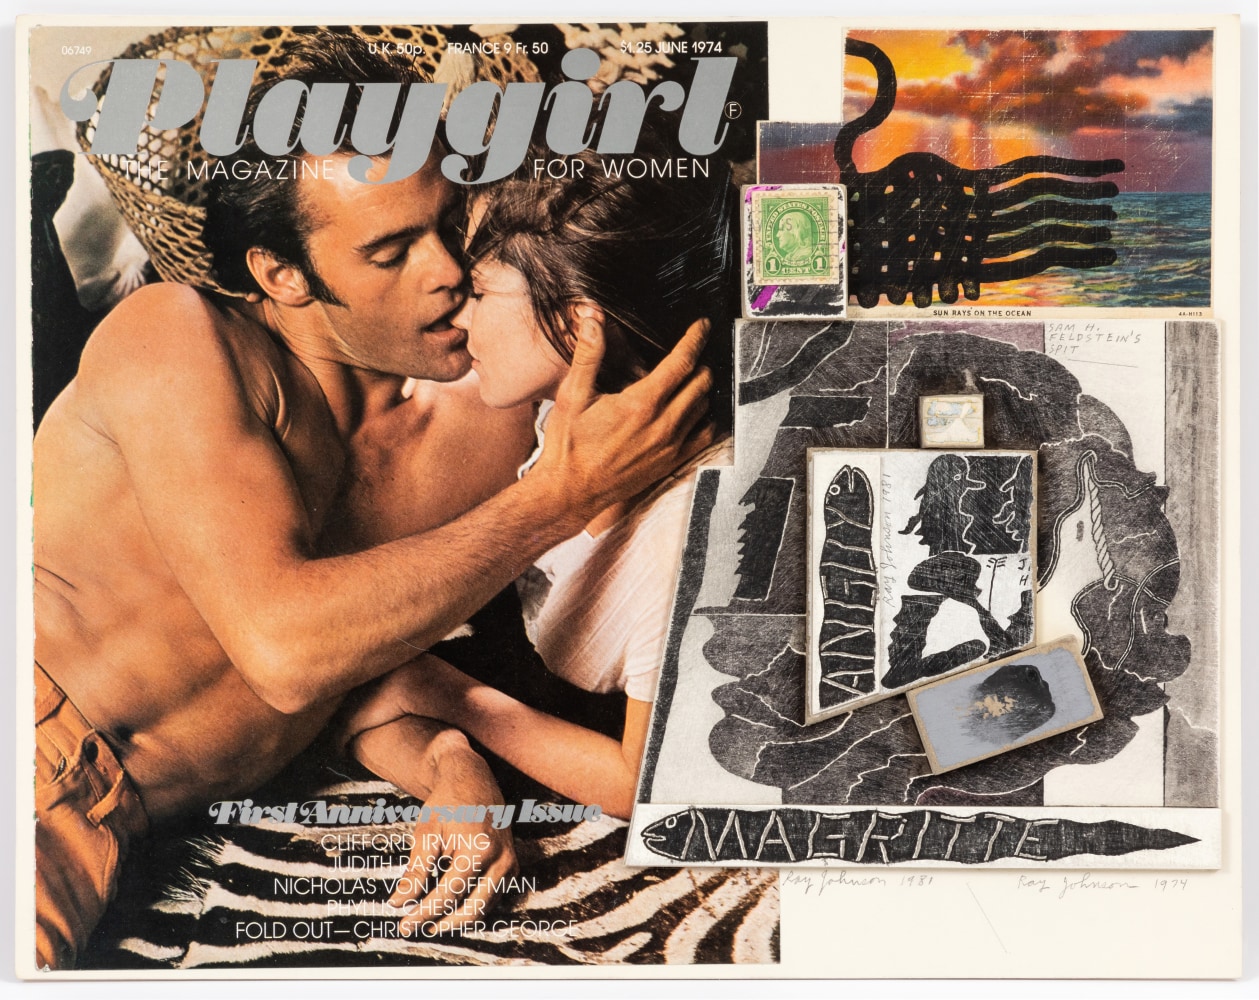 Ray Johnson, Untitled (Playgirl), 1981, 1974, Mixed media collage on illustration board, 11 x 14 in., 15097